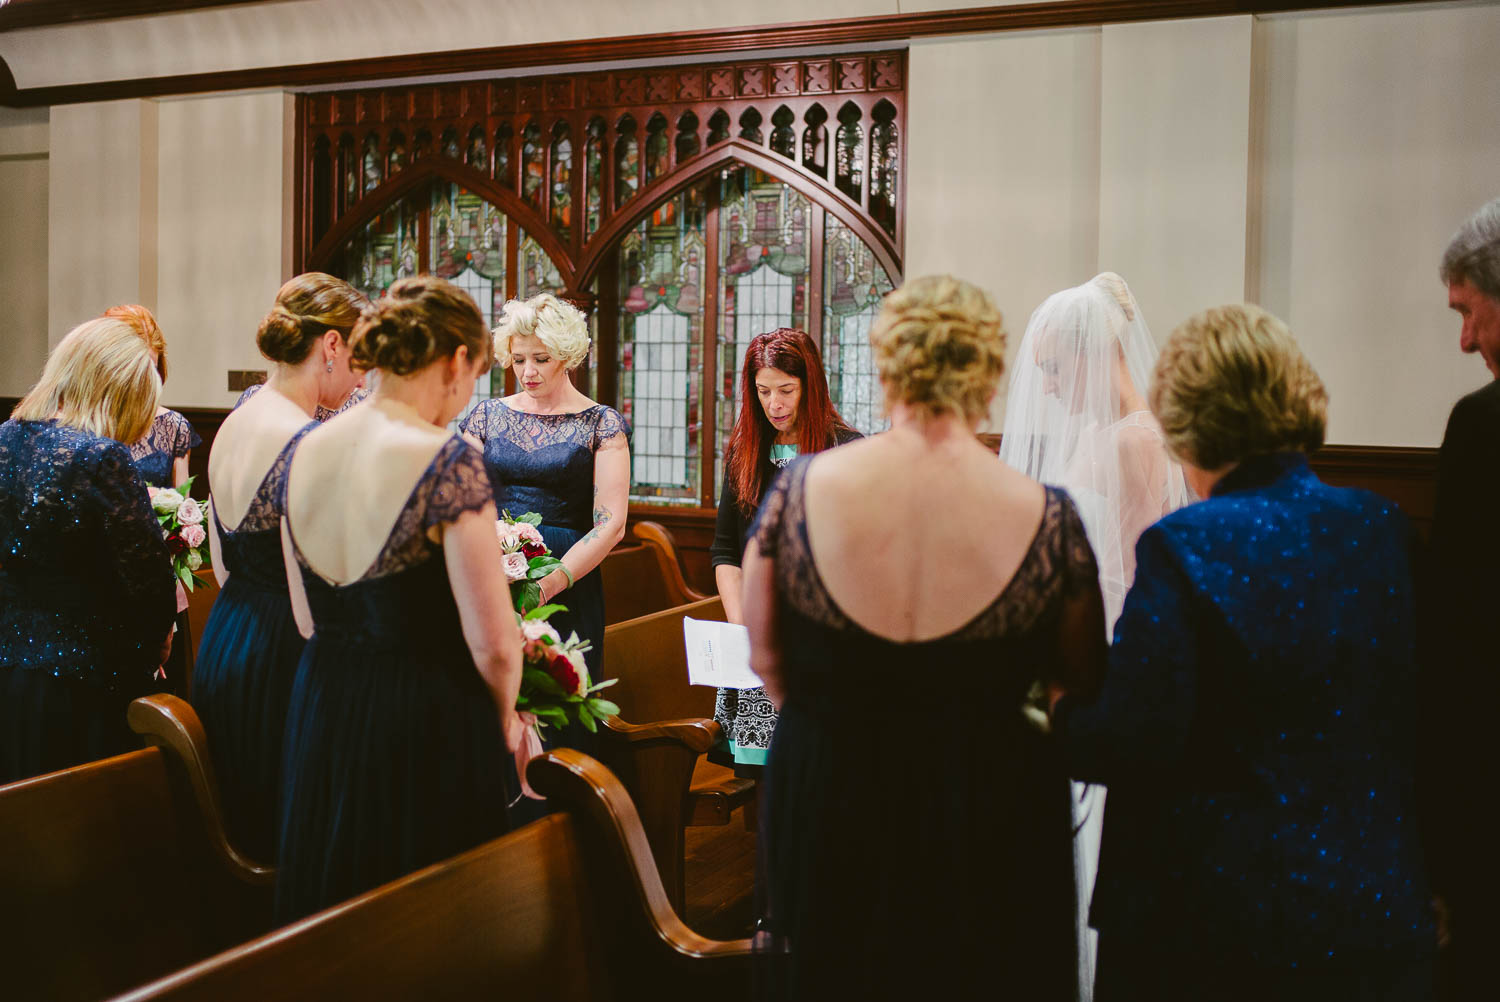 A prayer is held with immediate friends and family with the bride at United Methodist Church moments before the ceremony